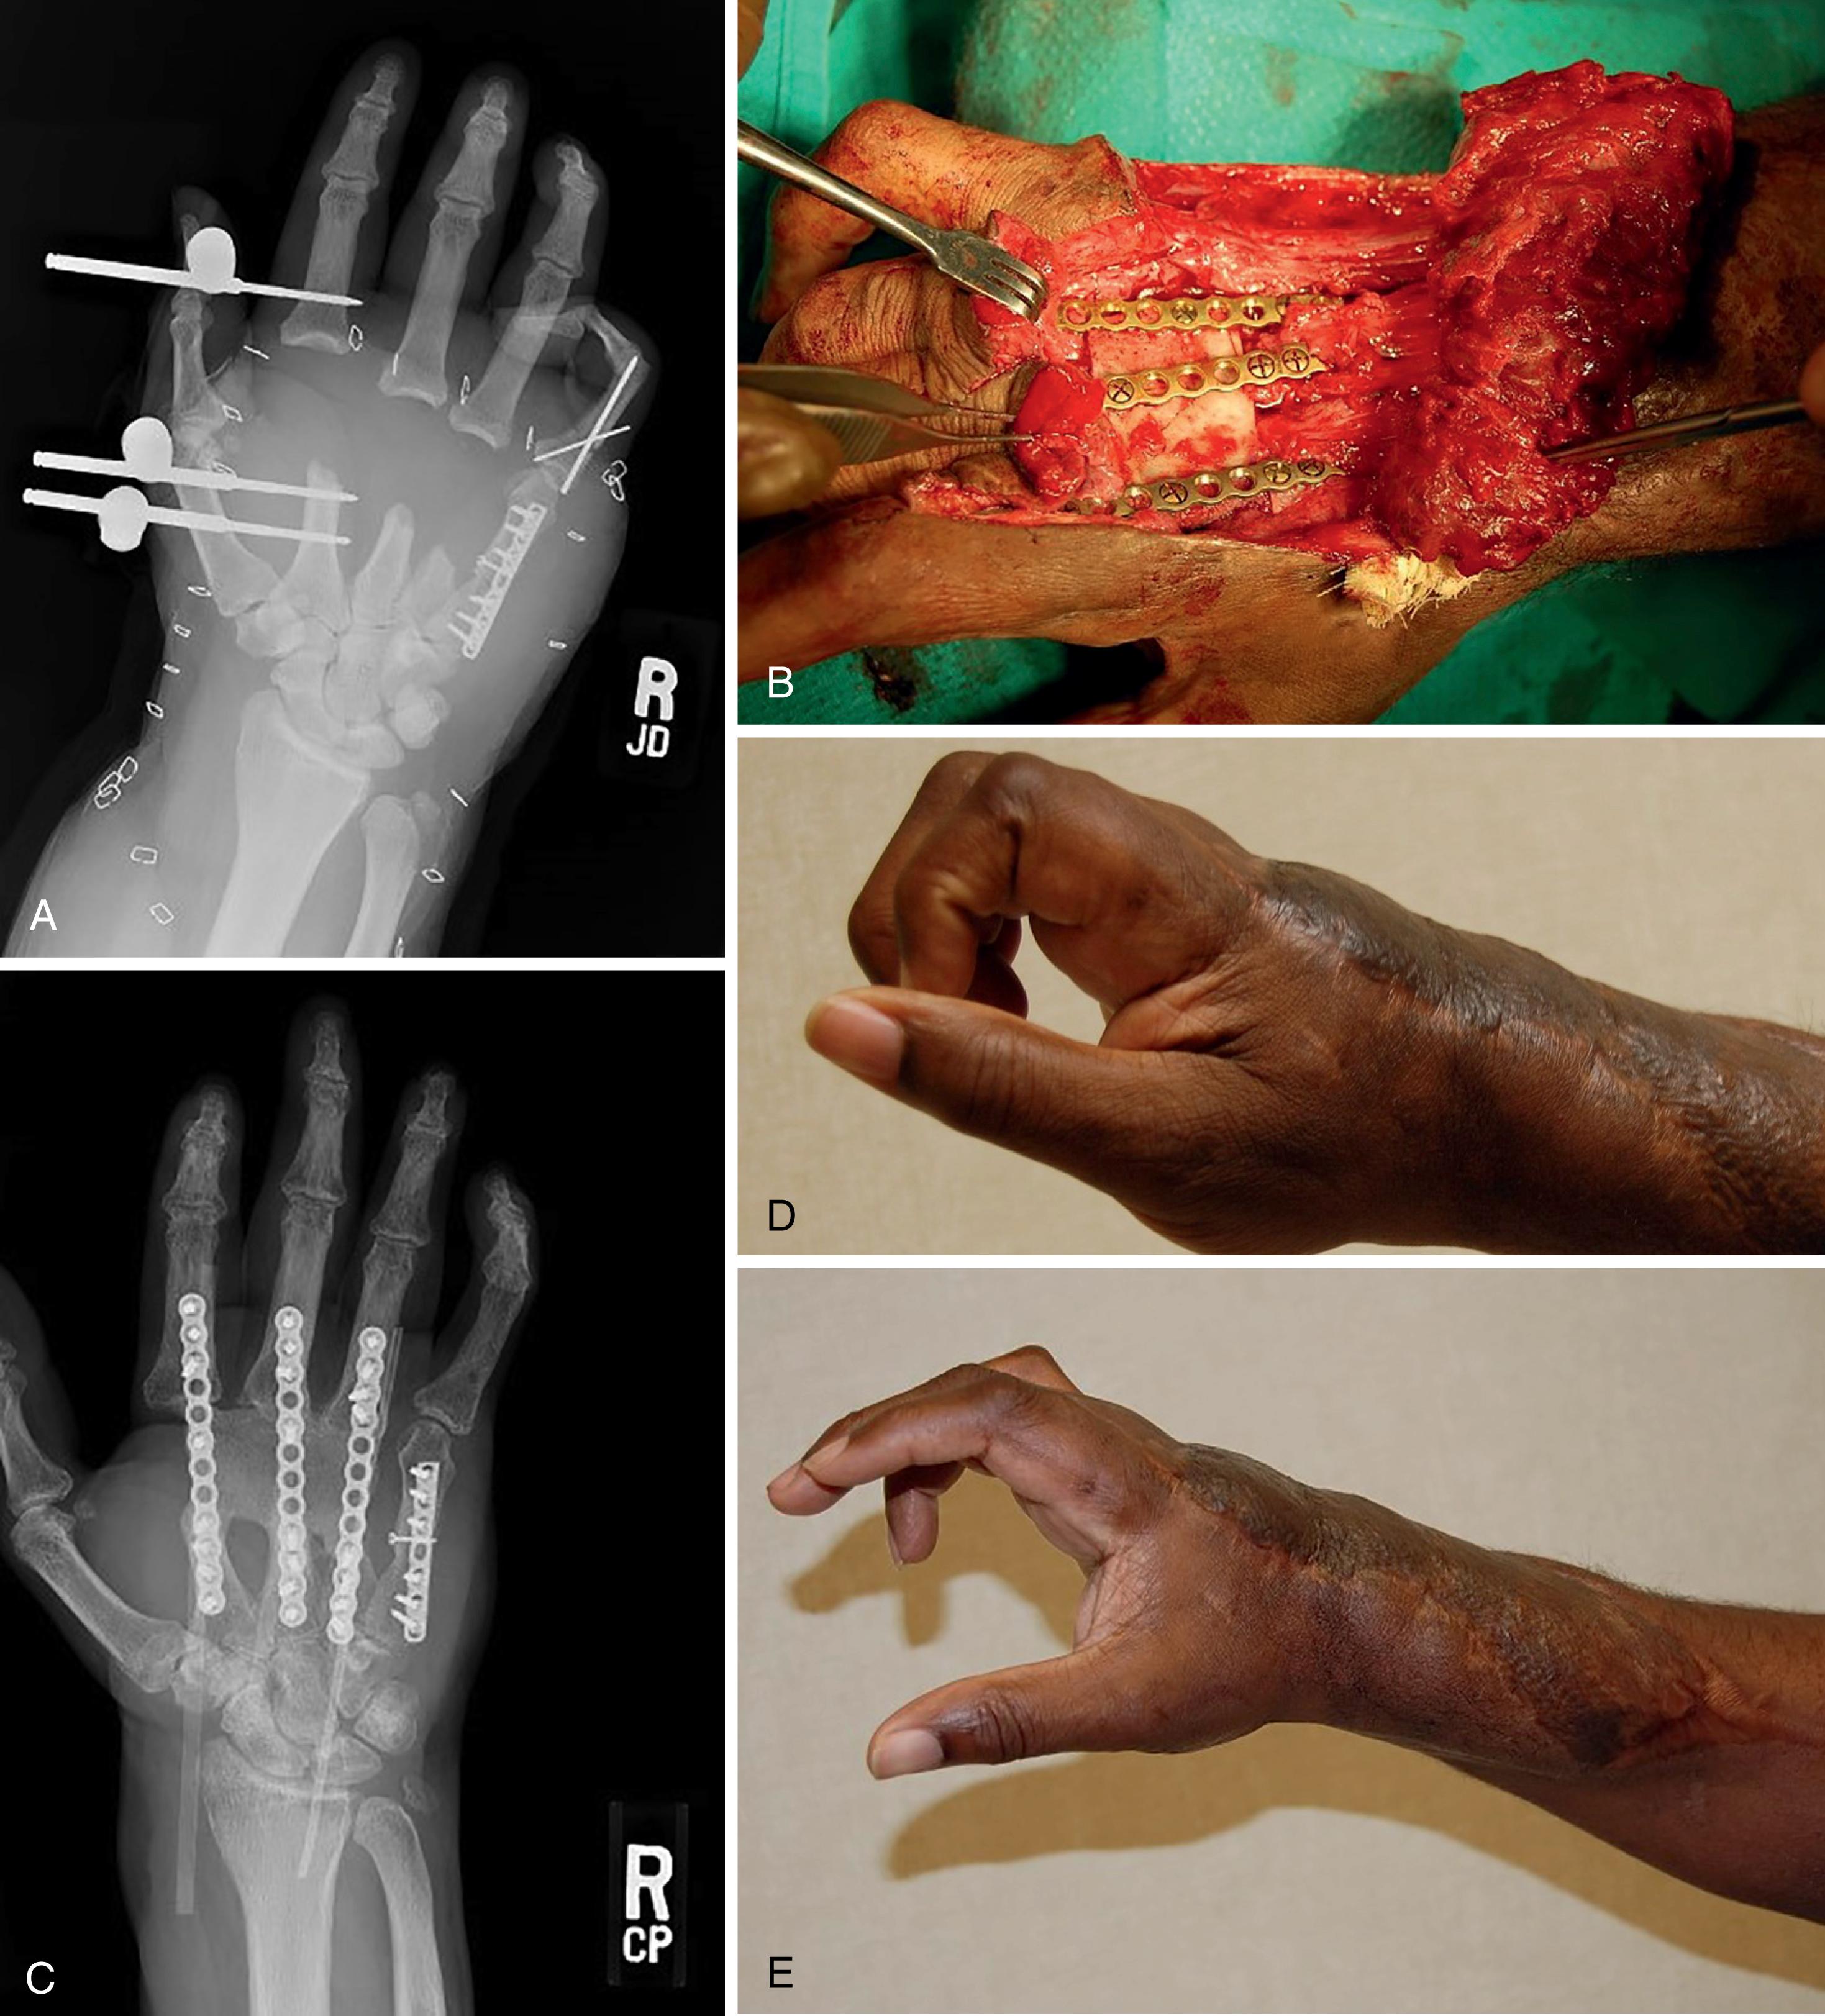 Fig. 7.21, A, Preoperative radiograph demonstrating extensive metacarpal bone loss of the radial three digits following an industrial accident. B, Intraoperative image of a large tricortical iliac crest bone graft in place and plates being applied. C, Postoperative radiograph demonstrating the use of a single large tricortical iliac crest bone graft to span the bony defect and fuse the radial three MCP joints. Hunter rods were placed with subsequent extensor tendon reconstruction. D and E, Clinical outcome of the case demonstrating acceptable restoration of digital motion.